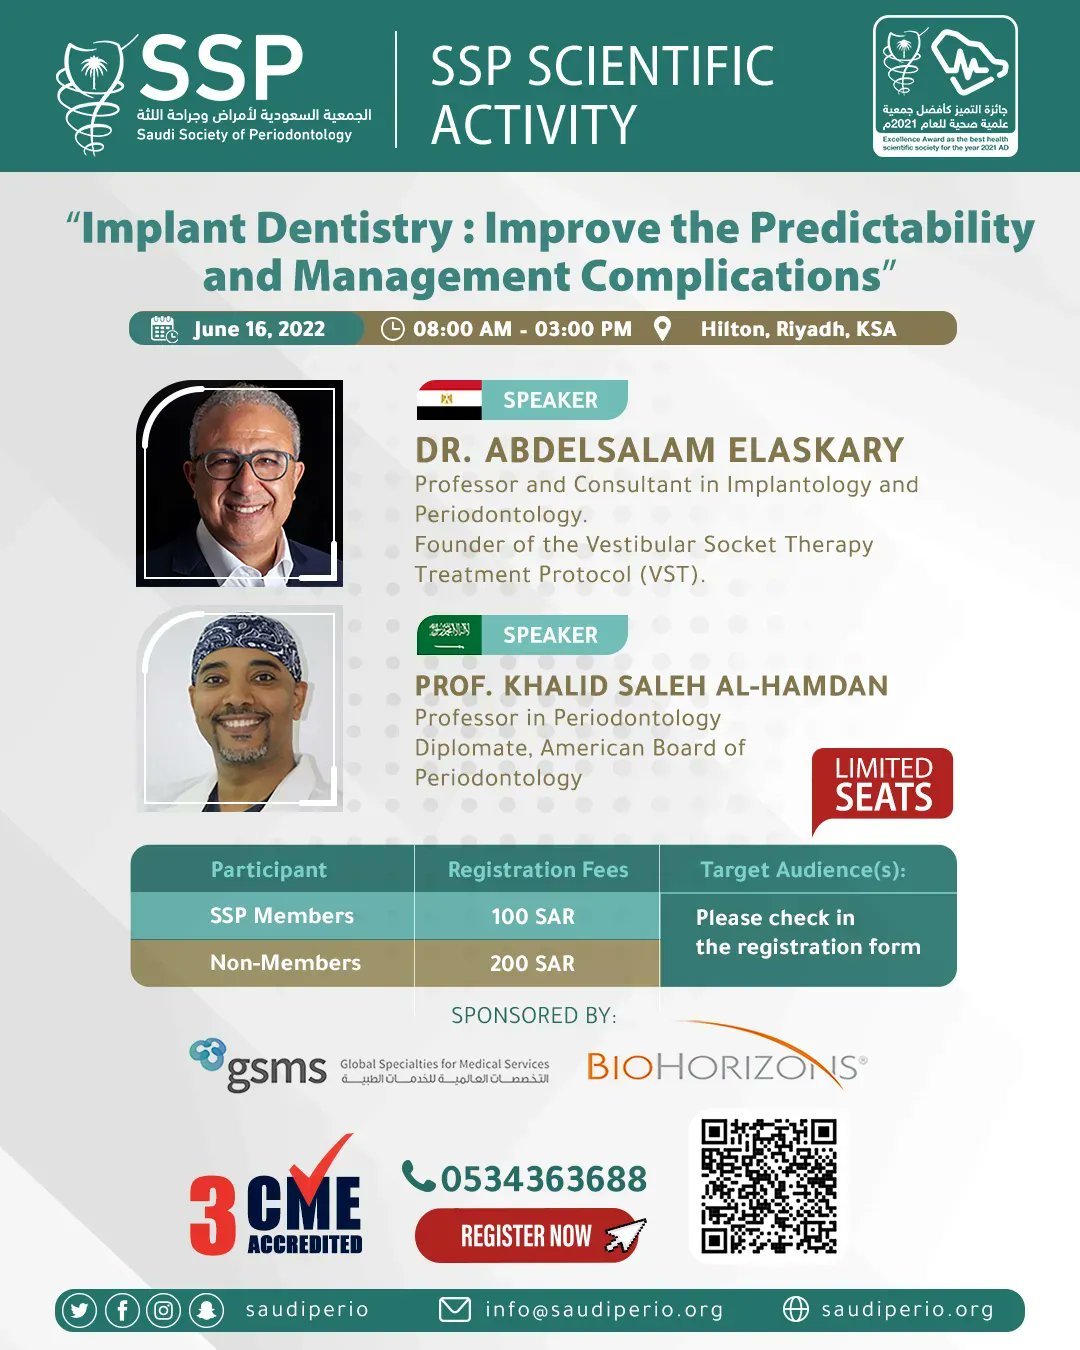 Saudi Society of Periodontology on X: "🚩REGISTER NOW to attend the  scientific event Implant Dentistry : Improve the Predictability and  Management Complications Dr. Abdulsalam Elaskary Prof. Khaled Al Hamdan  📍Hilton Riyadh 📅